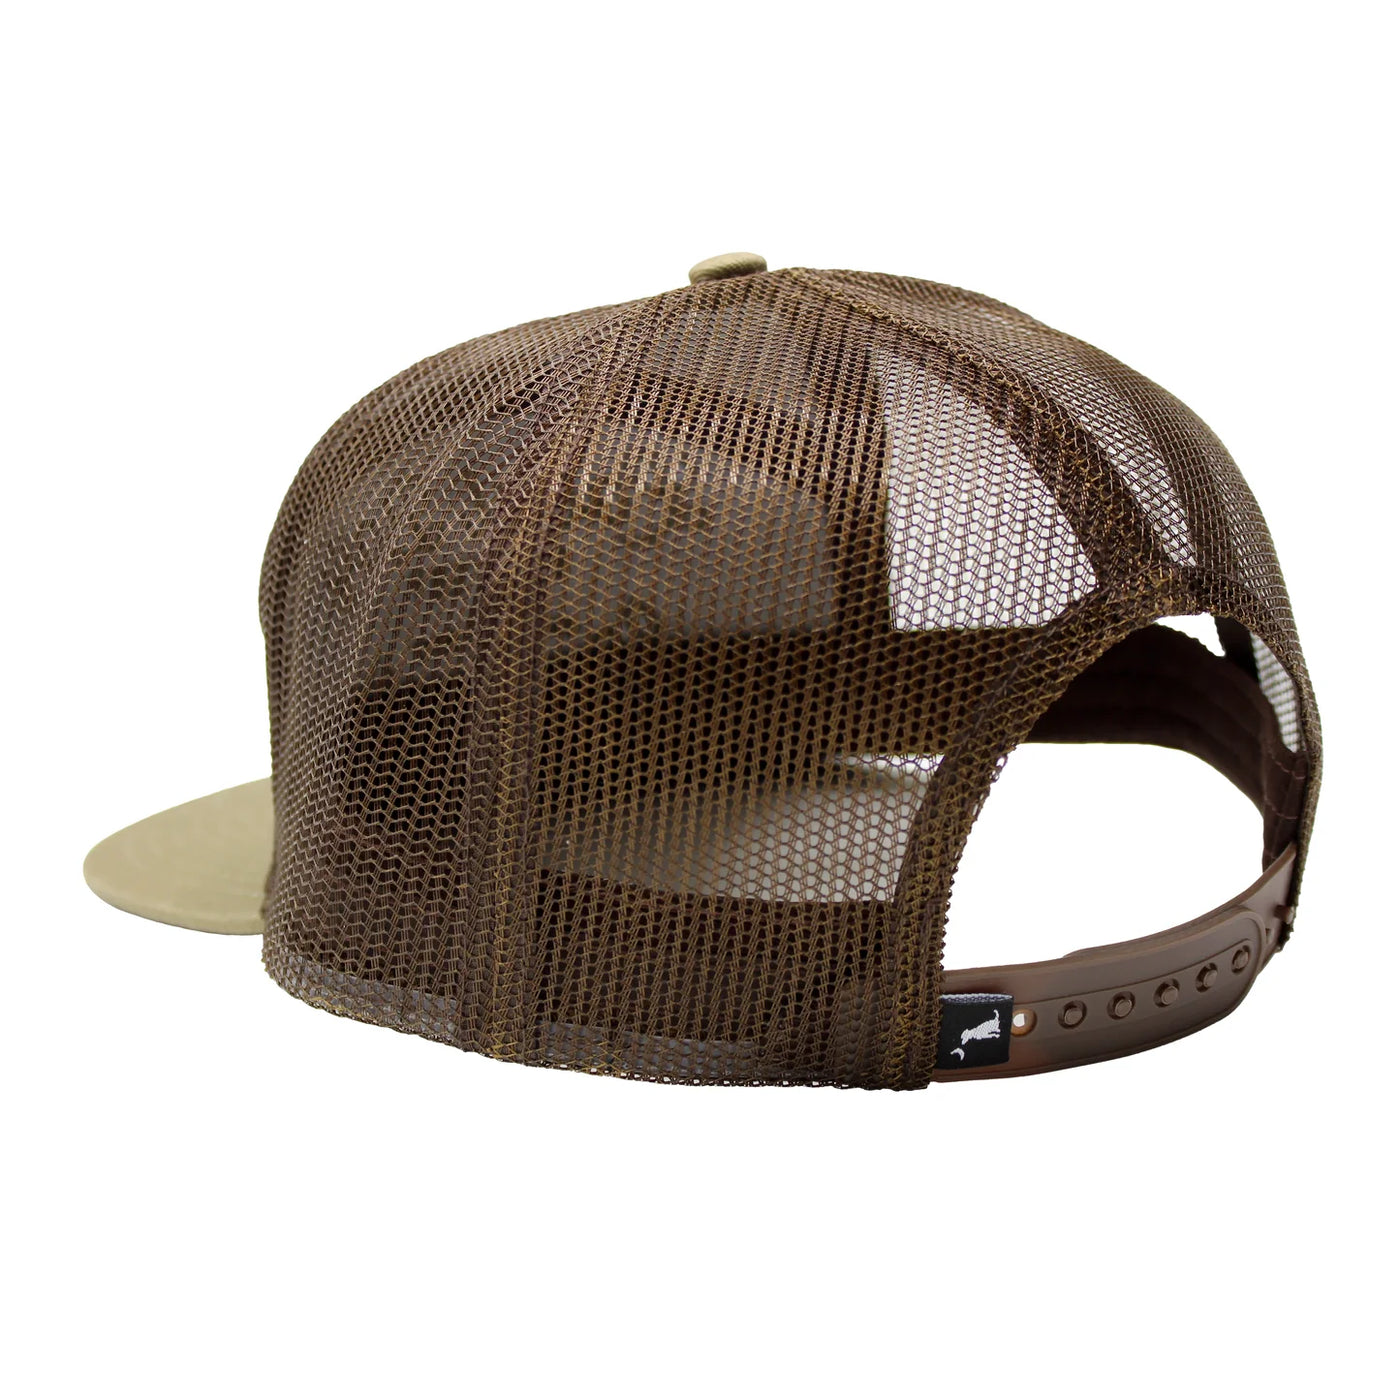 Local Boy Outfitters 7 Panel Brewery Hat Brown